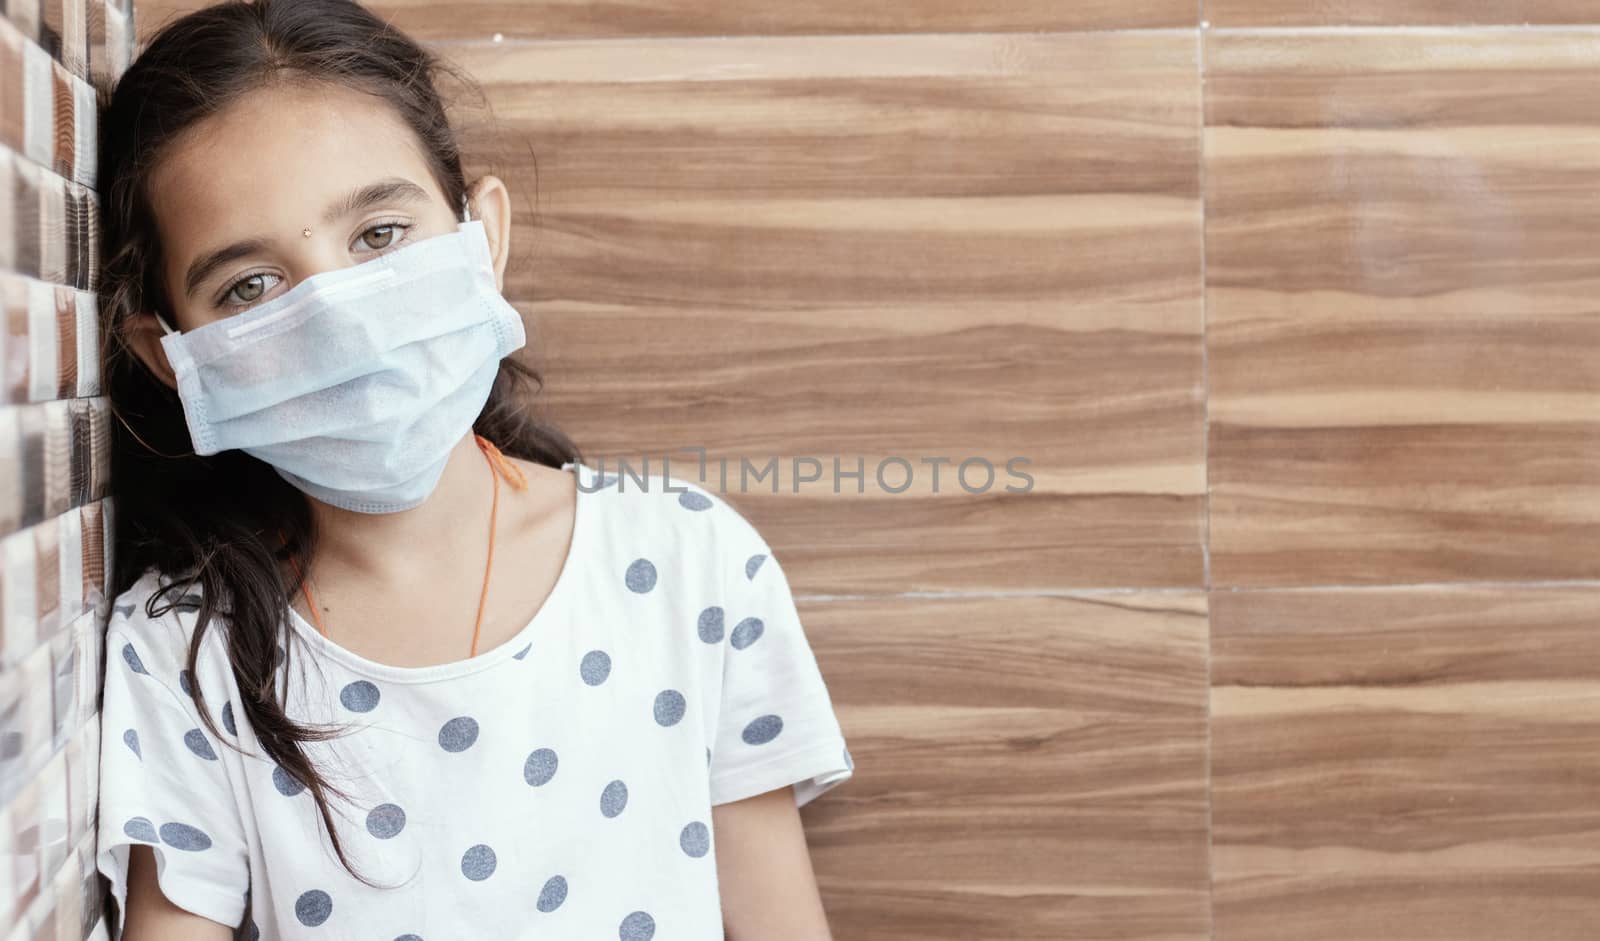 Concept of PTSD or post-traumatic stress disorder after covid-19 or coronavirus pandemic - Young teenager girl with medical mask wearing sat by leaning on well in sad, fear, or anxiety